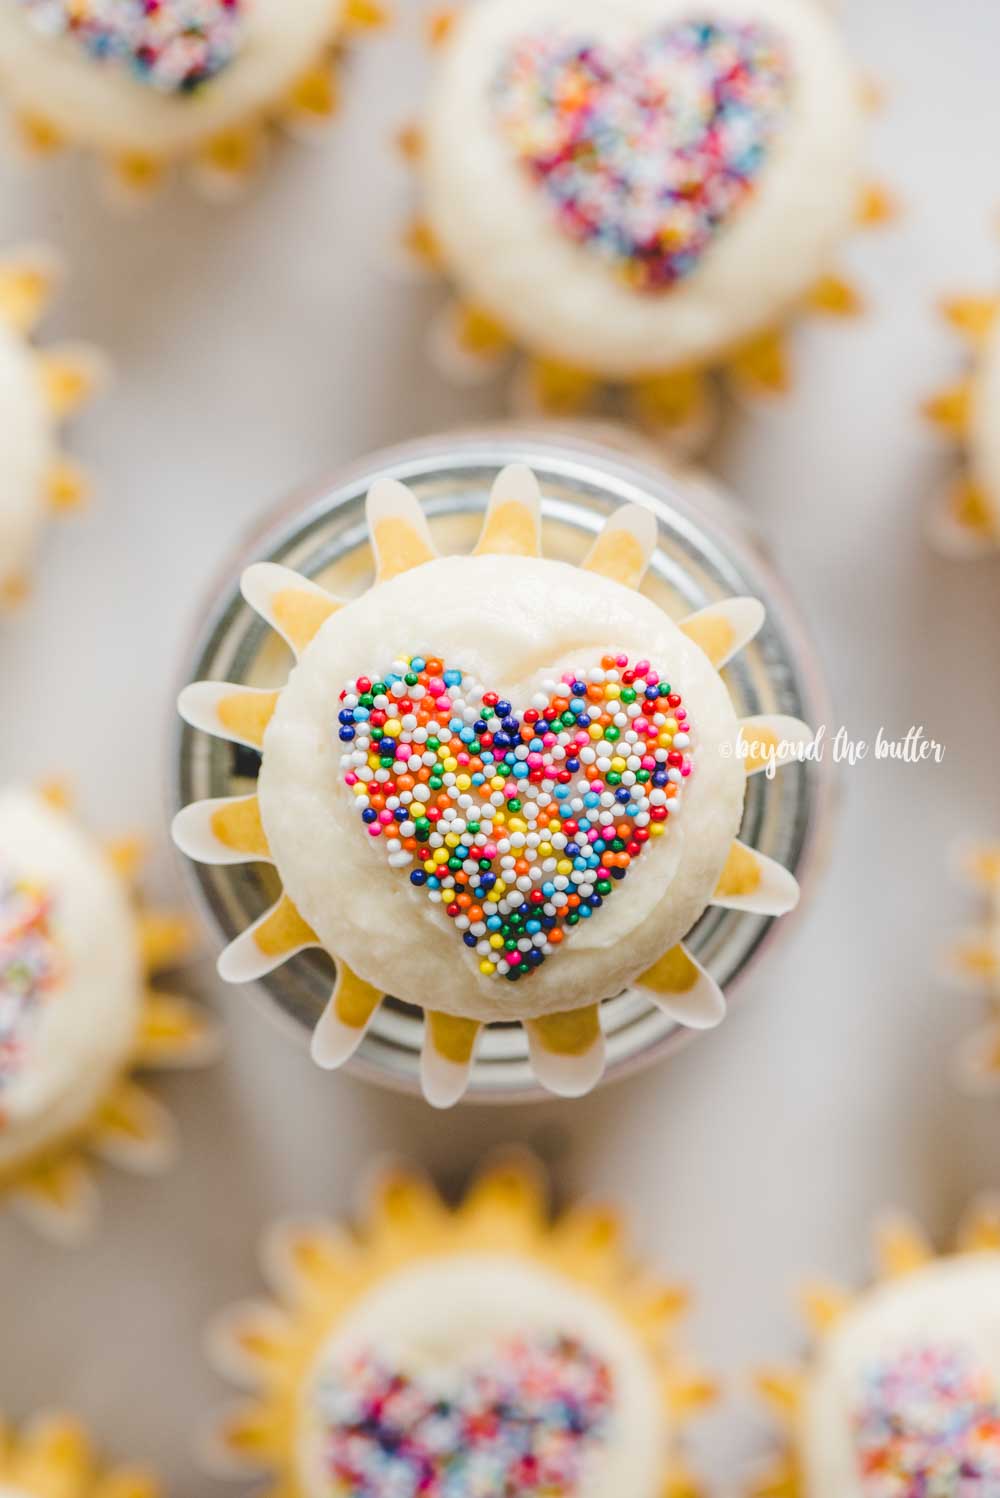 Overhead image of sprinkled heart cupcakes on white background with center cupcake on top of jar.